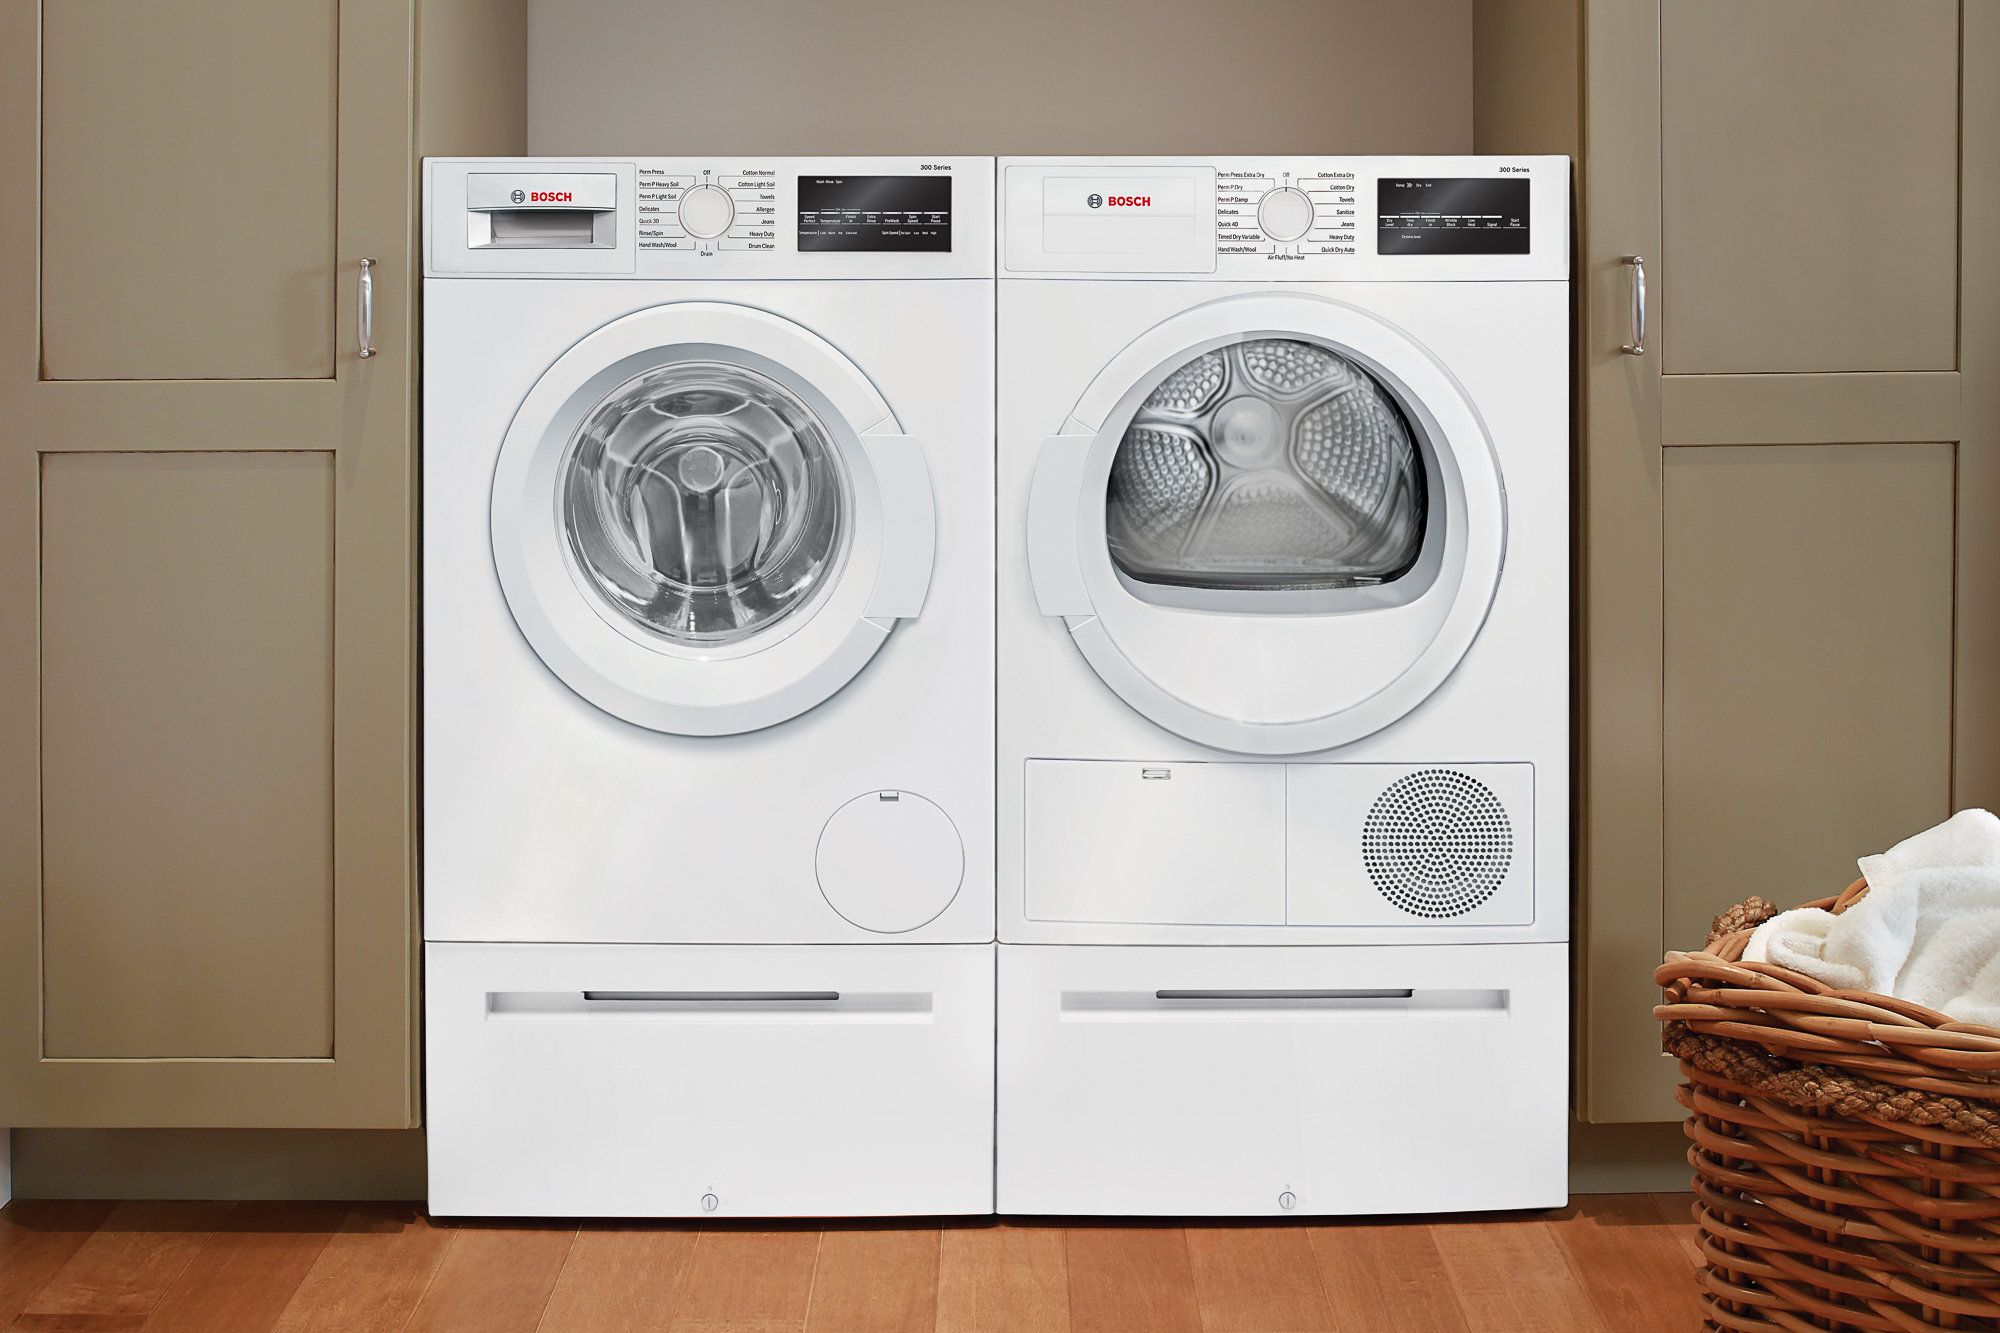 Dryers How Do They Work? ReviewThis